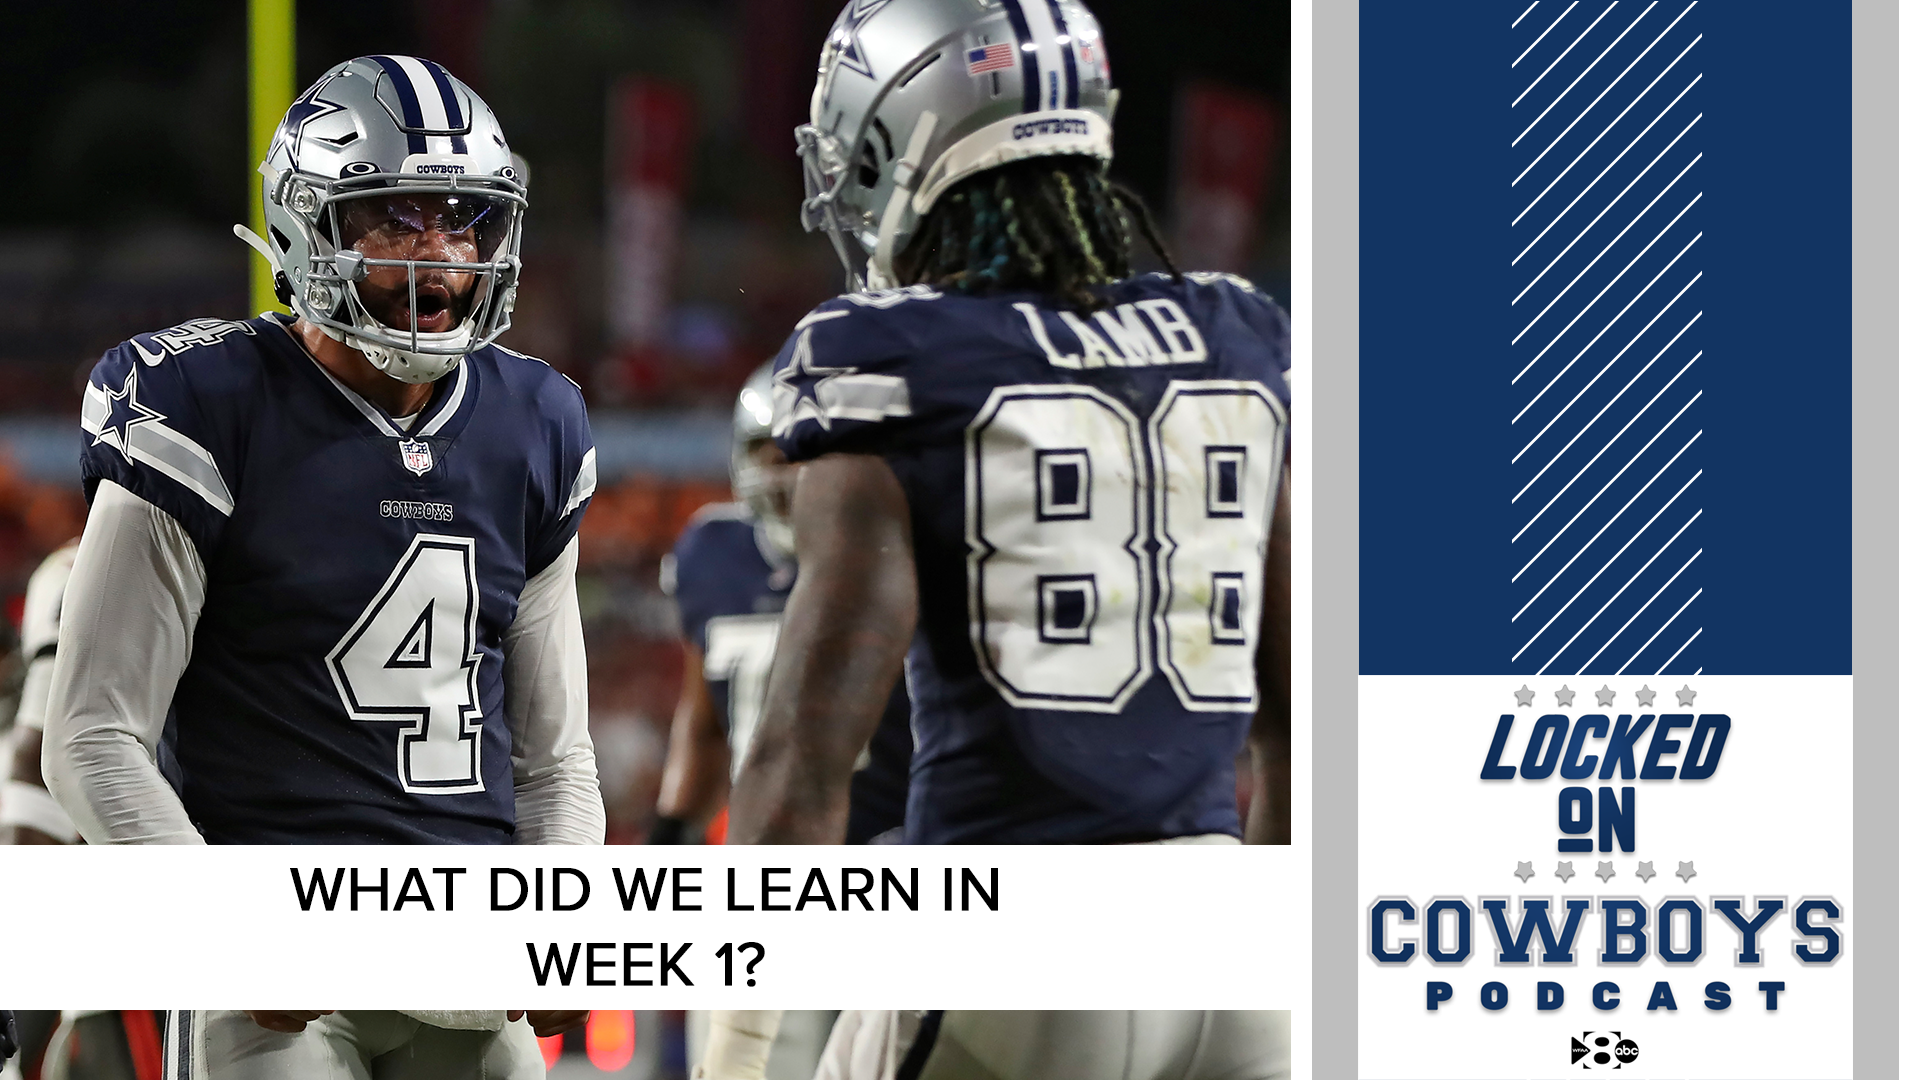 Cowboys fans have been waiting for this game for a long time. @Marcus_Mosher and @McCoolBCB analyze the loss against the Bucs and figure out what we learned.